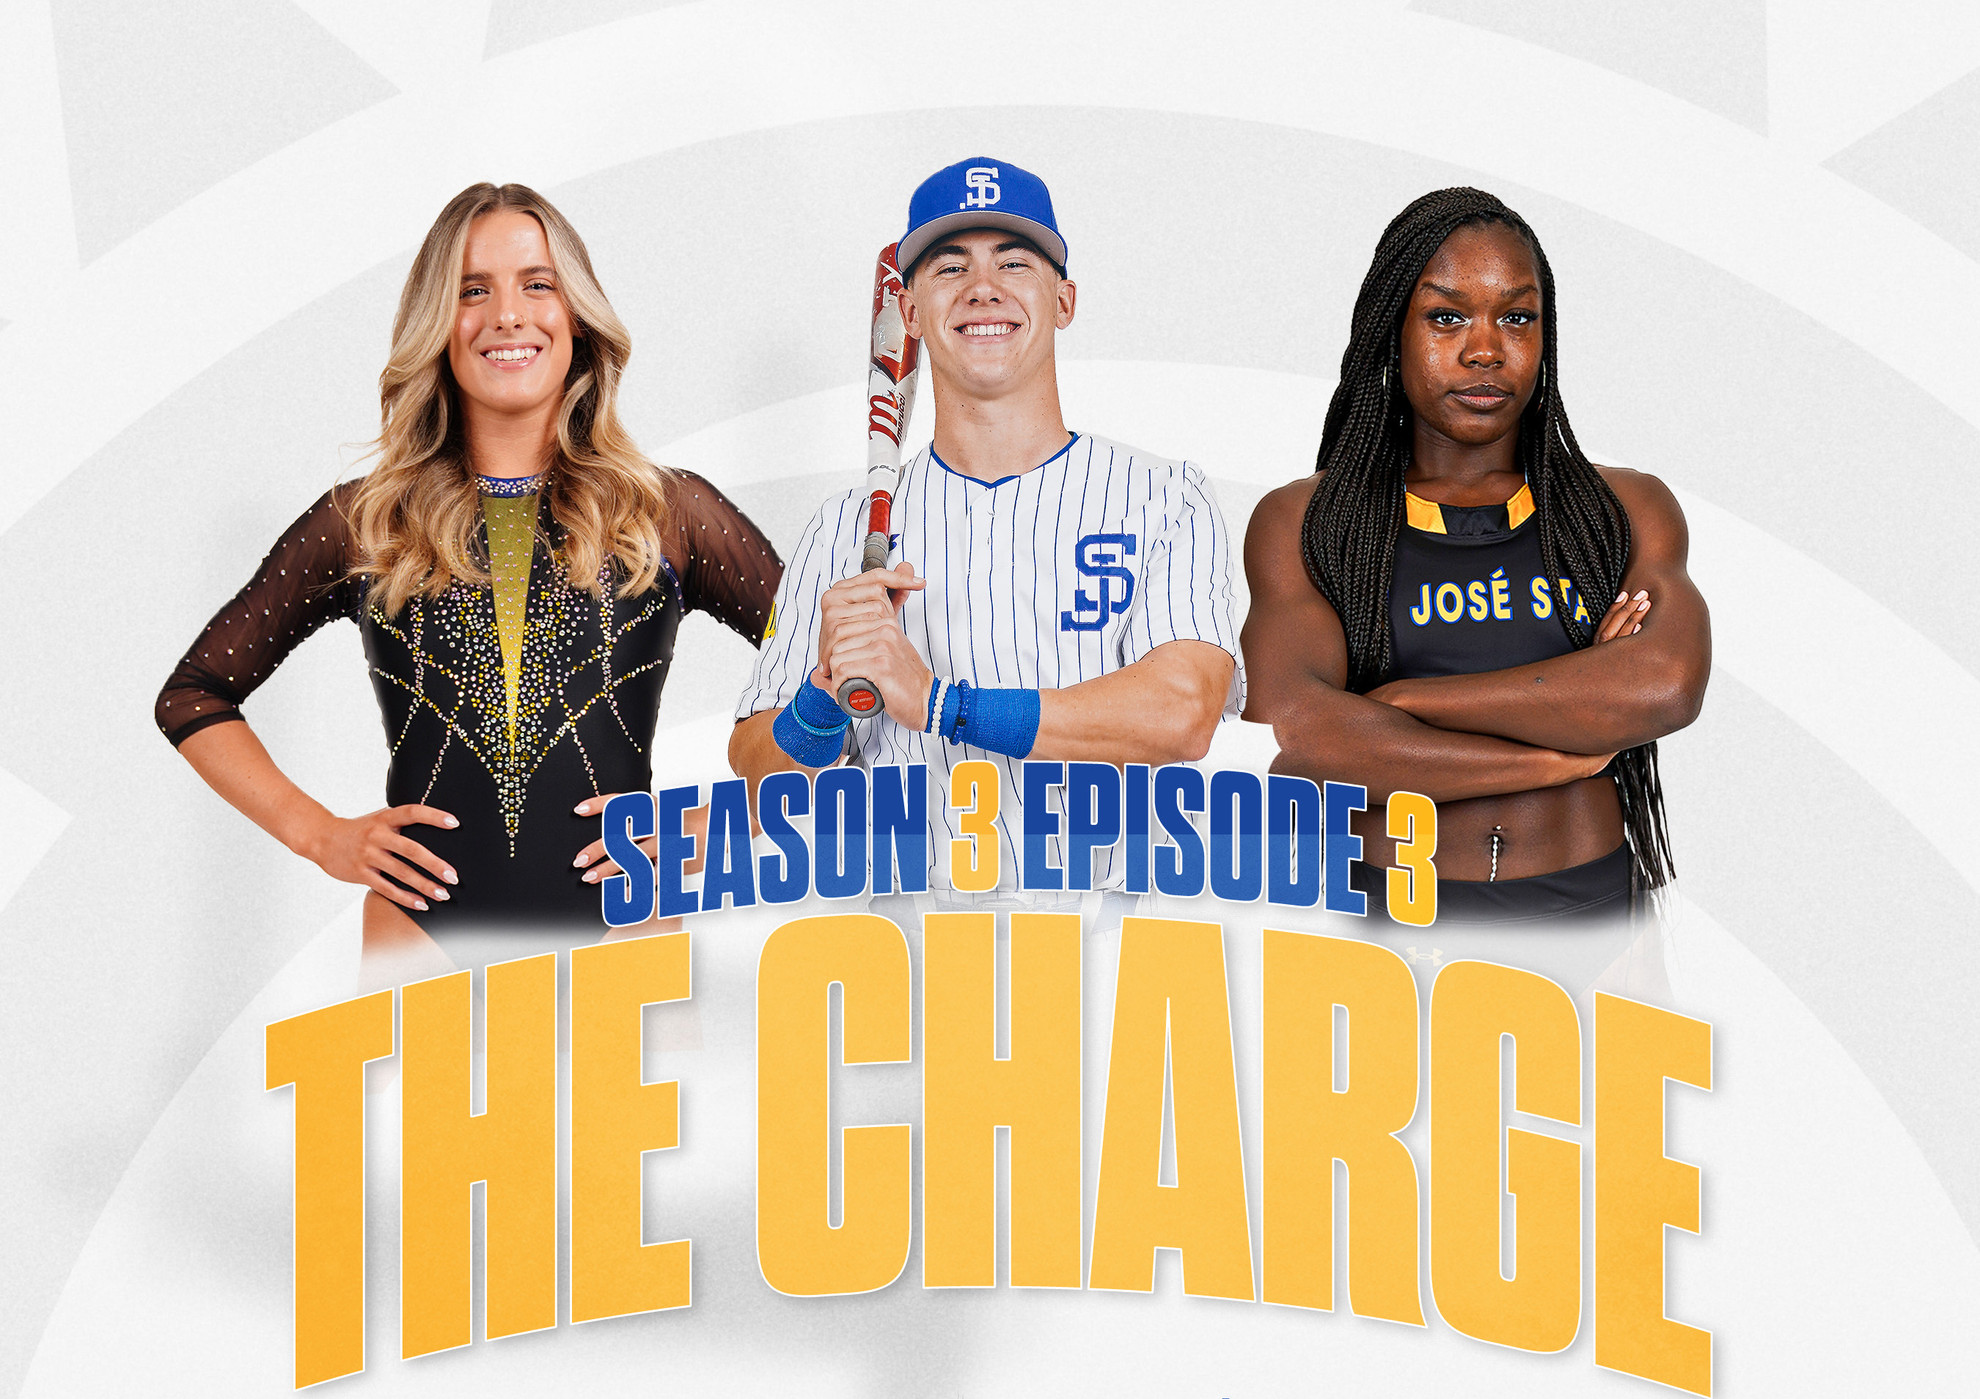 New Episode of The Charge Season 3 Premiering Tonight on NBC Sports Bay Area – Check out the action on SJSU Athletics’ Official Website